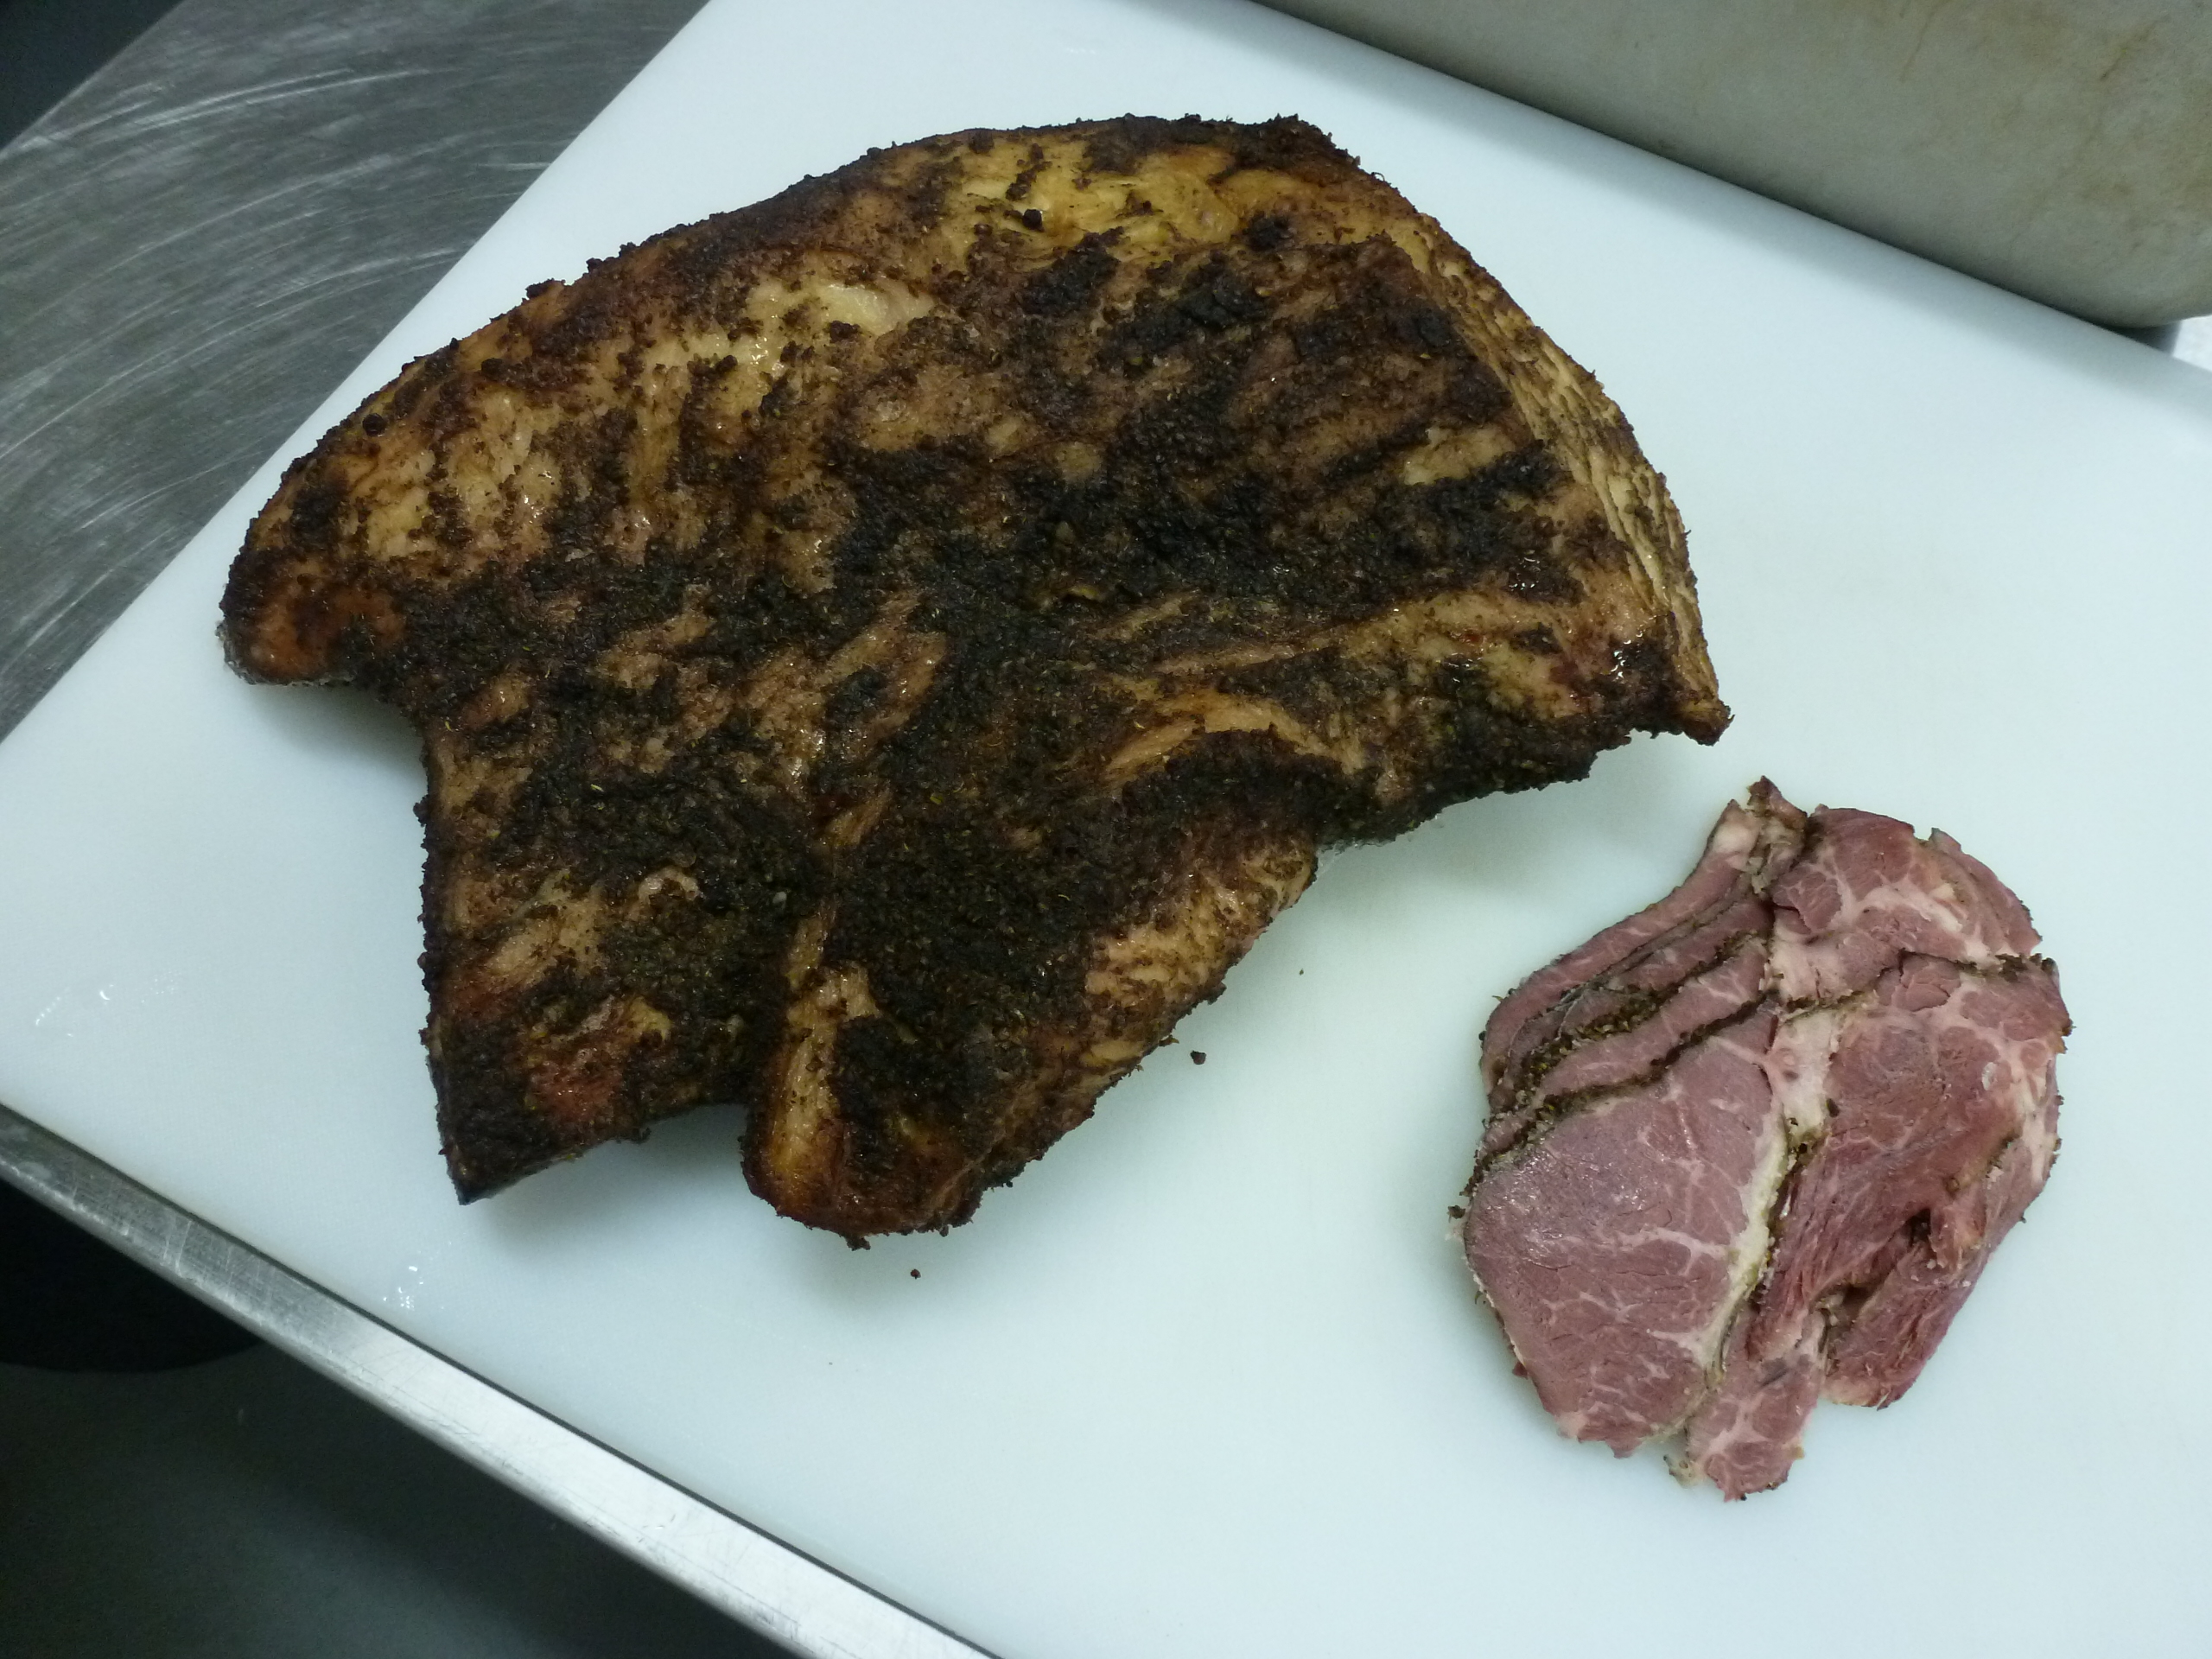 A slab of Montreal-style smoked meat